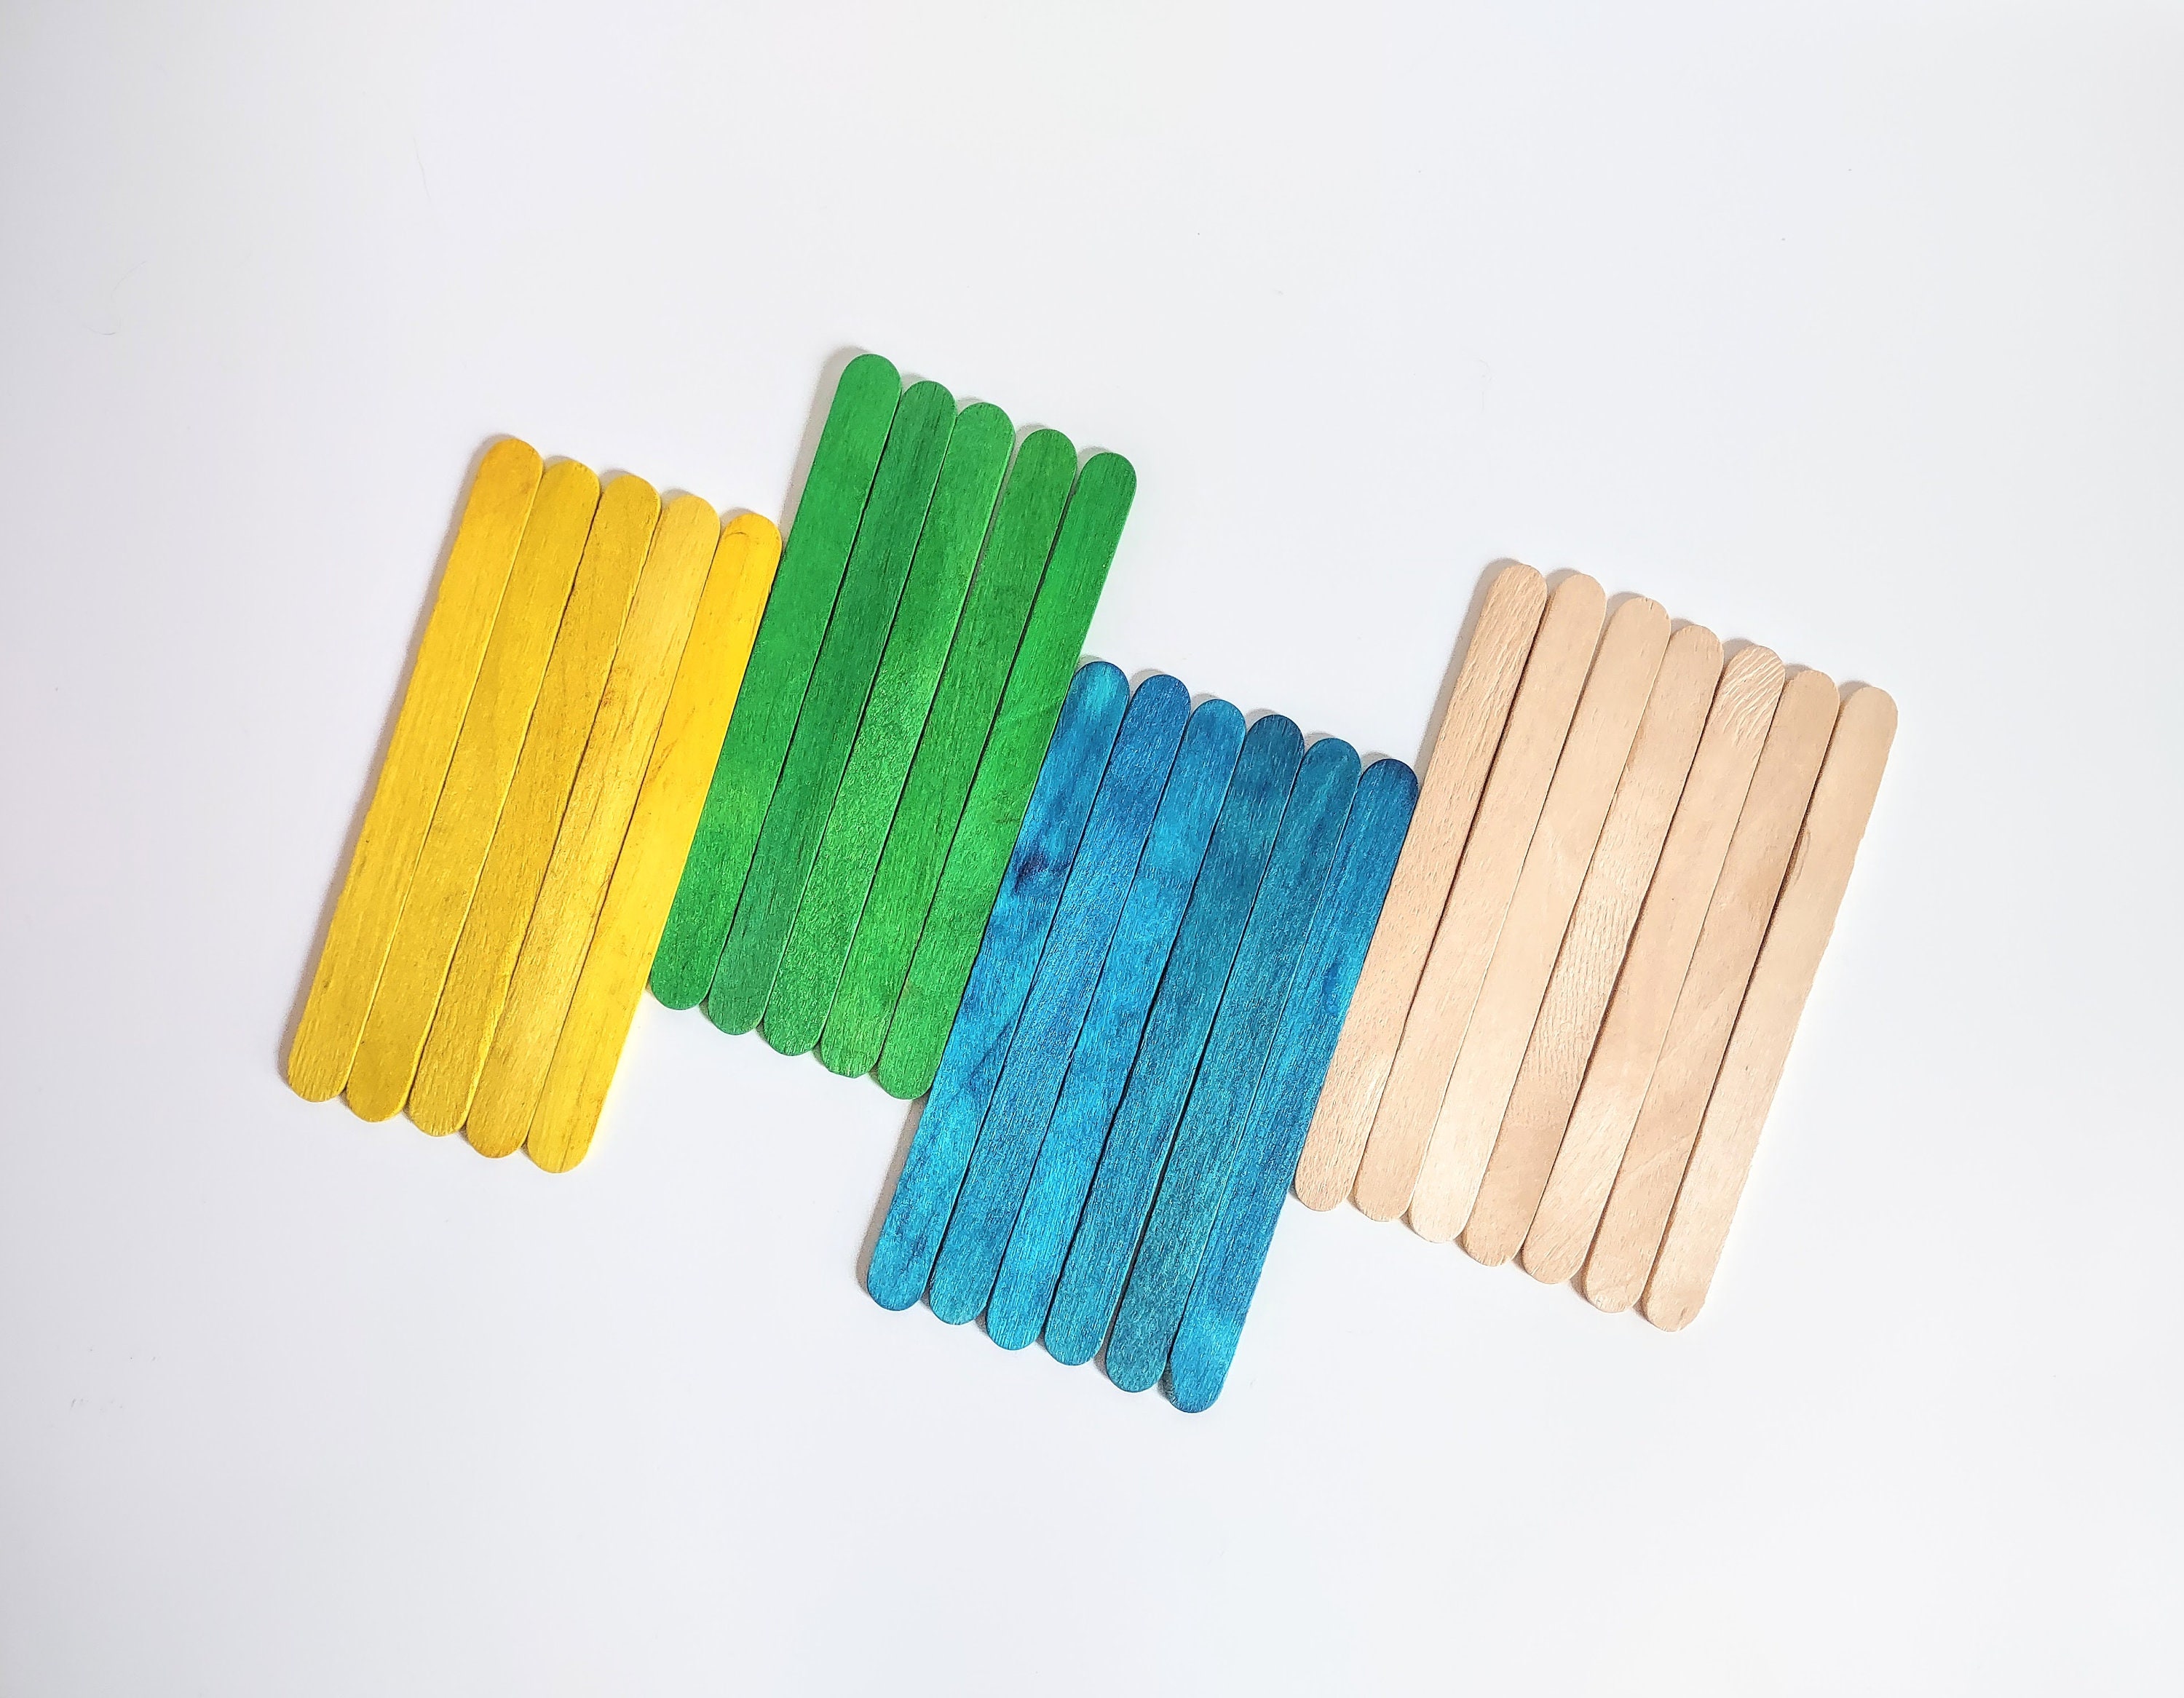 Wooden Popsicle Sticks for Cakesicles, Cake Pops, Ice Cream Pops, and  Krispie Treats Qty 50 